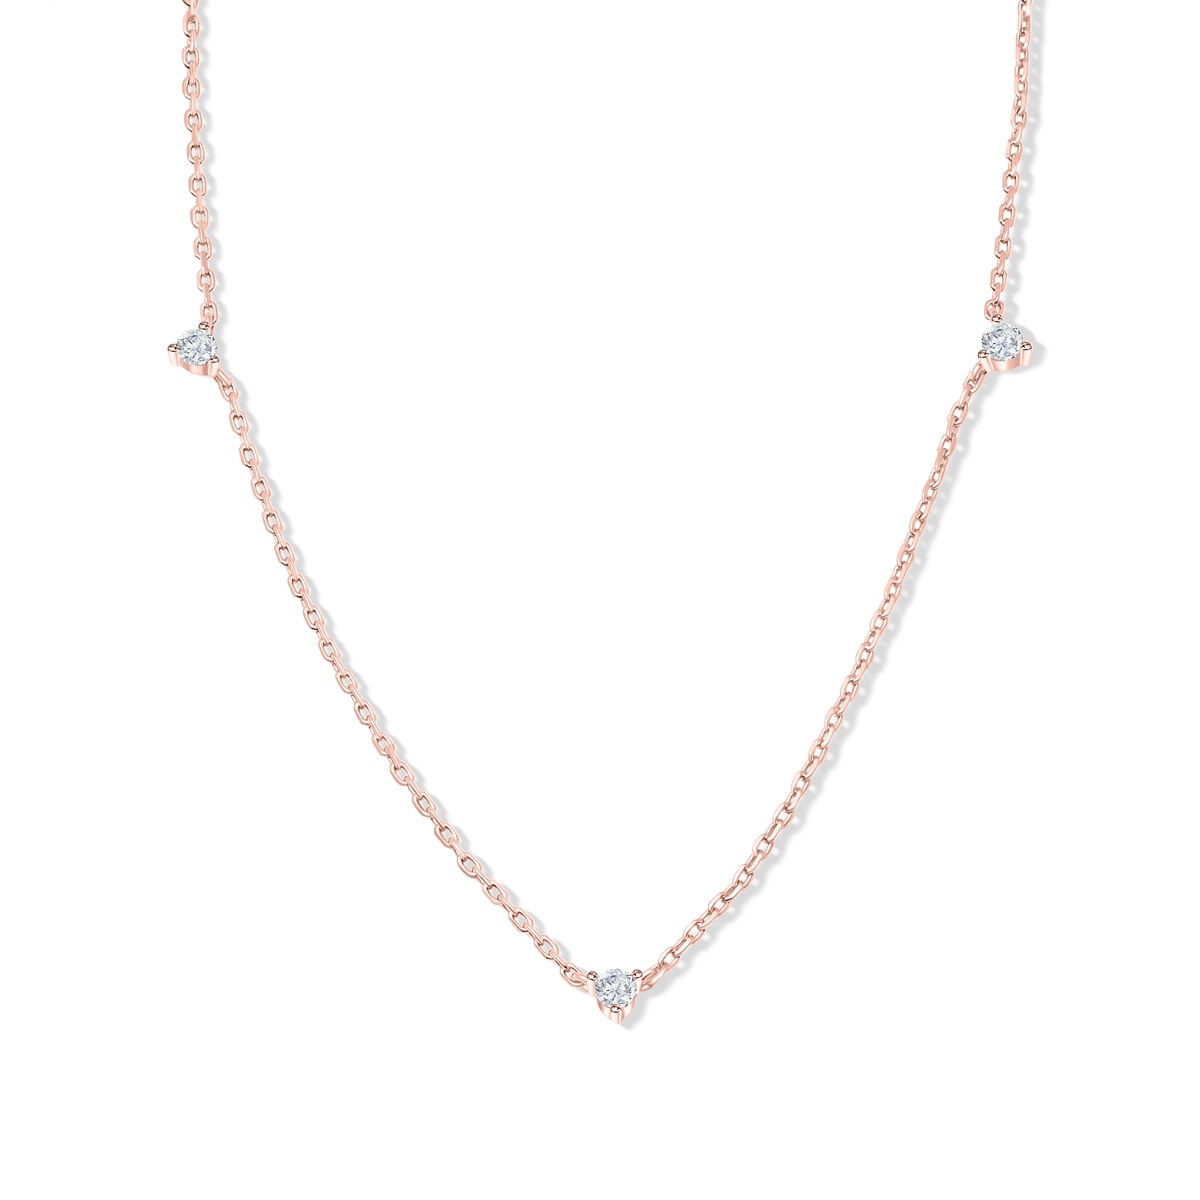 Rose gold small pendant chain necklace